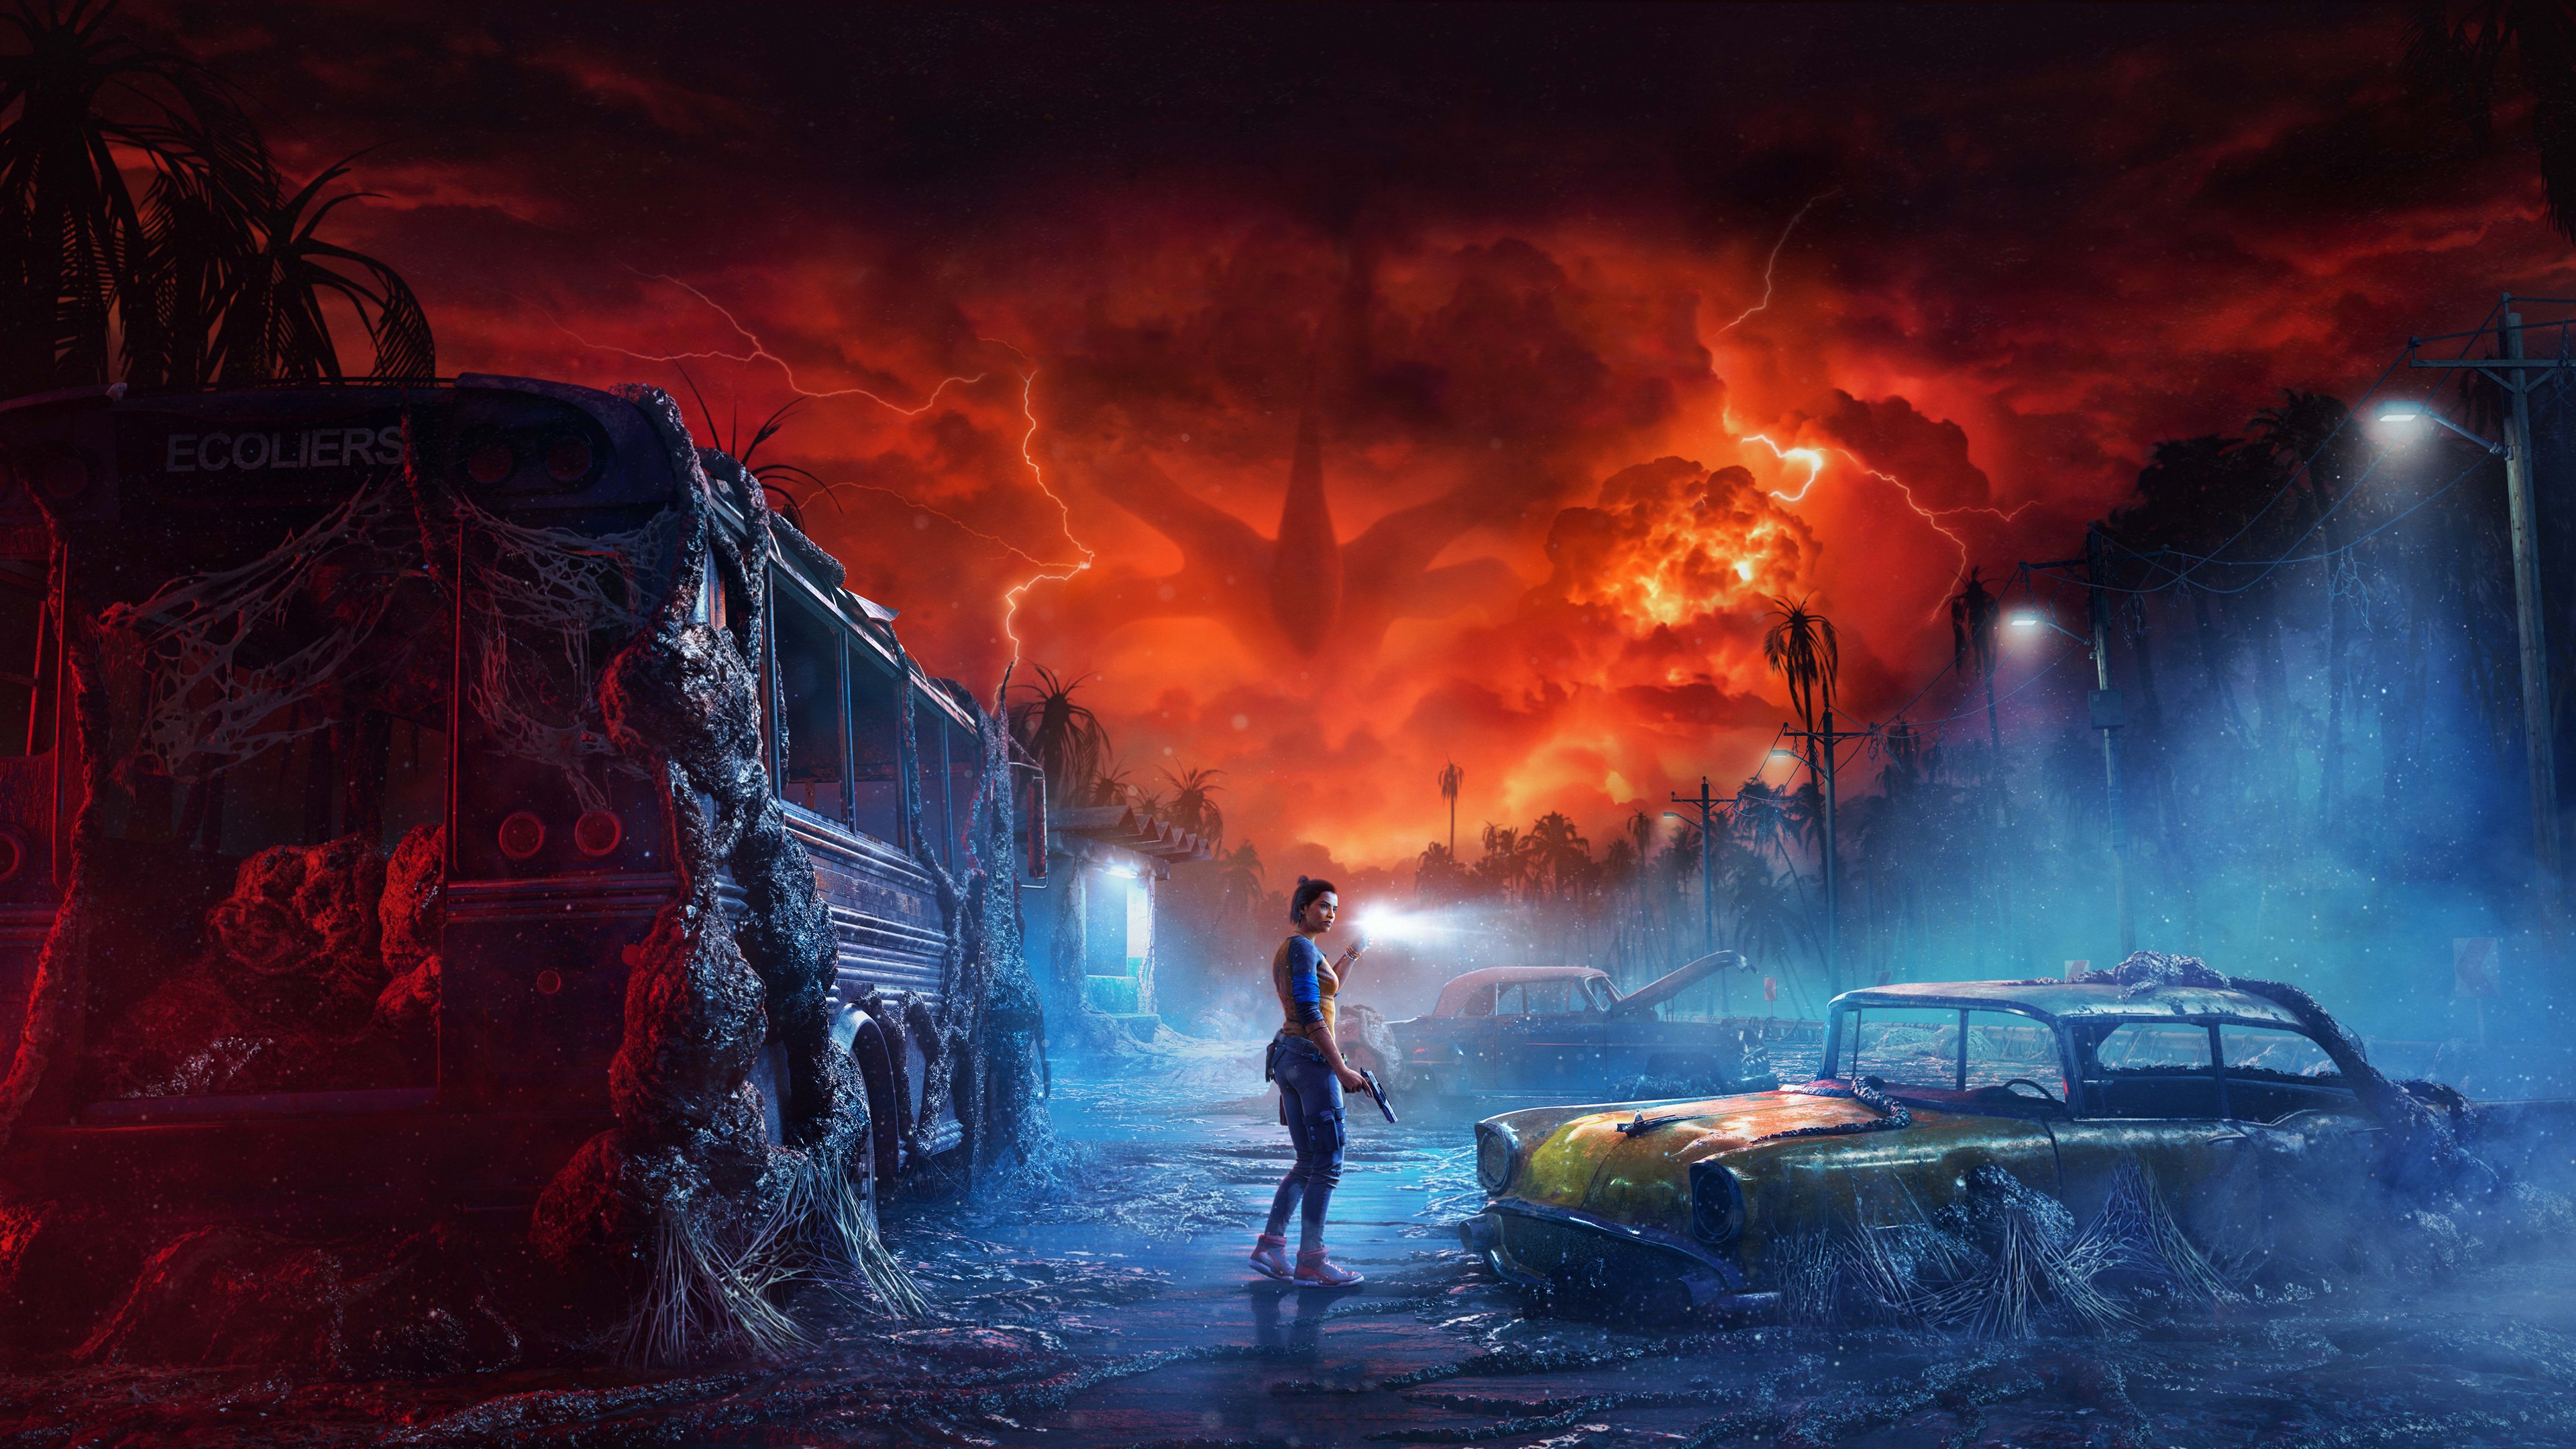 Far Cry 6 Stranger Things Video Games Women Fire Storm Night Artwork Science Fiction Vehicle Buses L 3840x2160